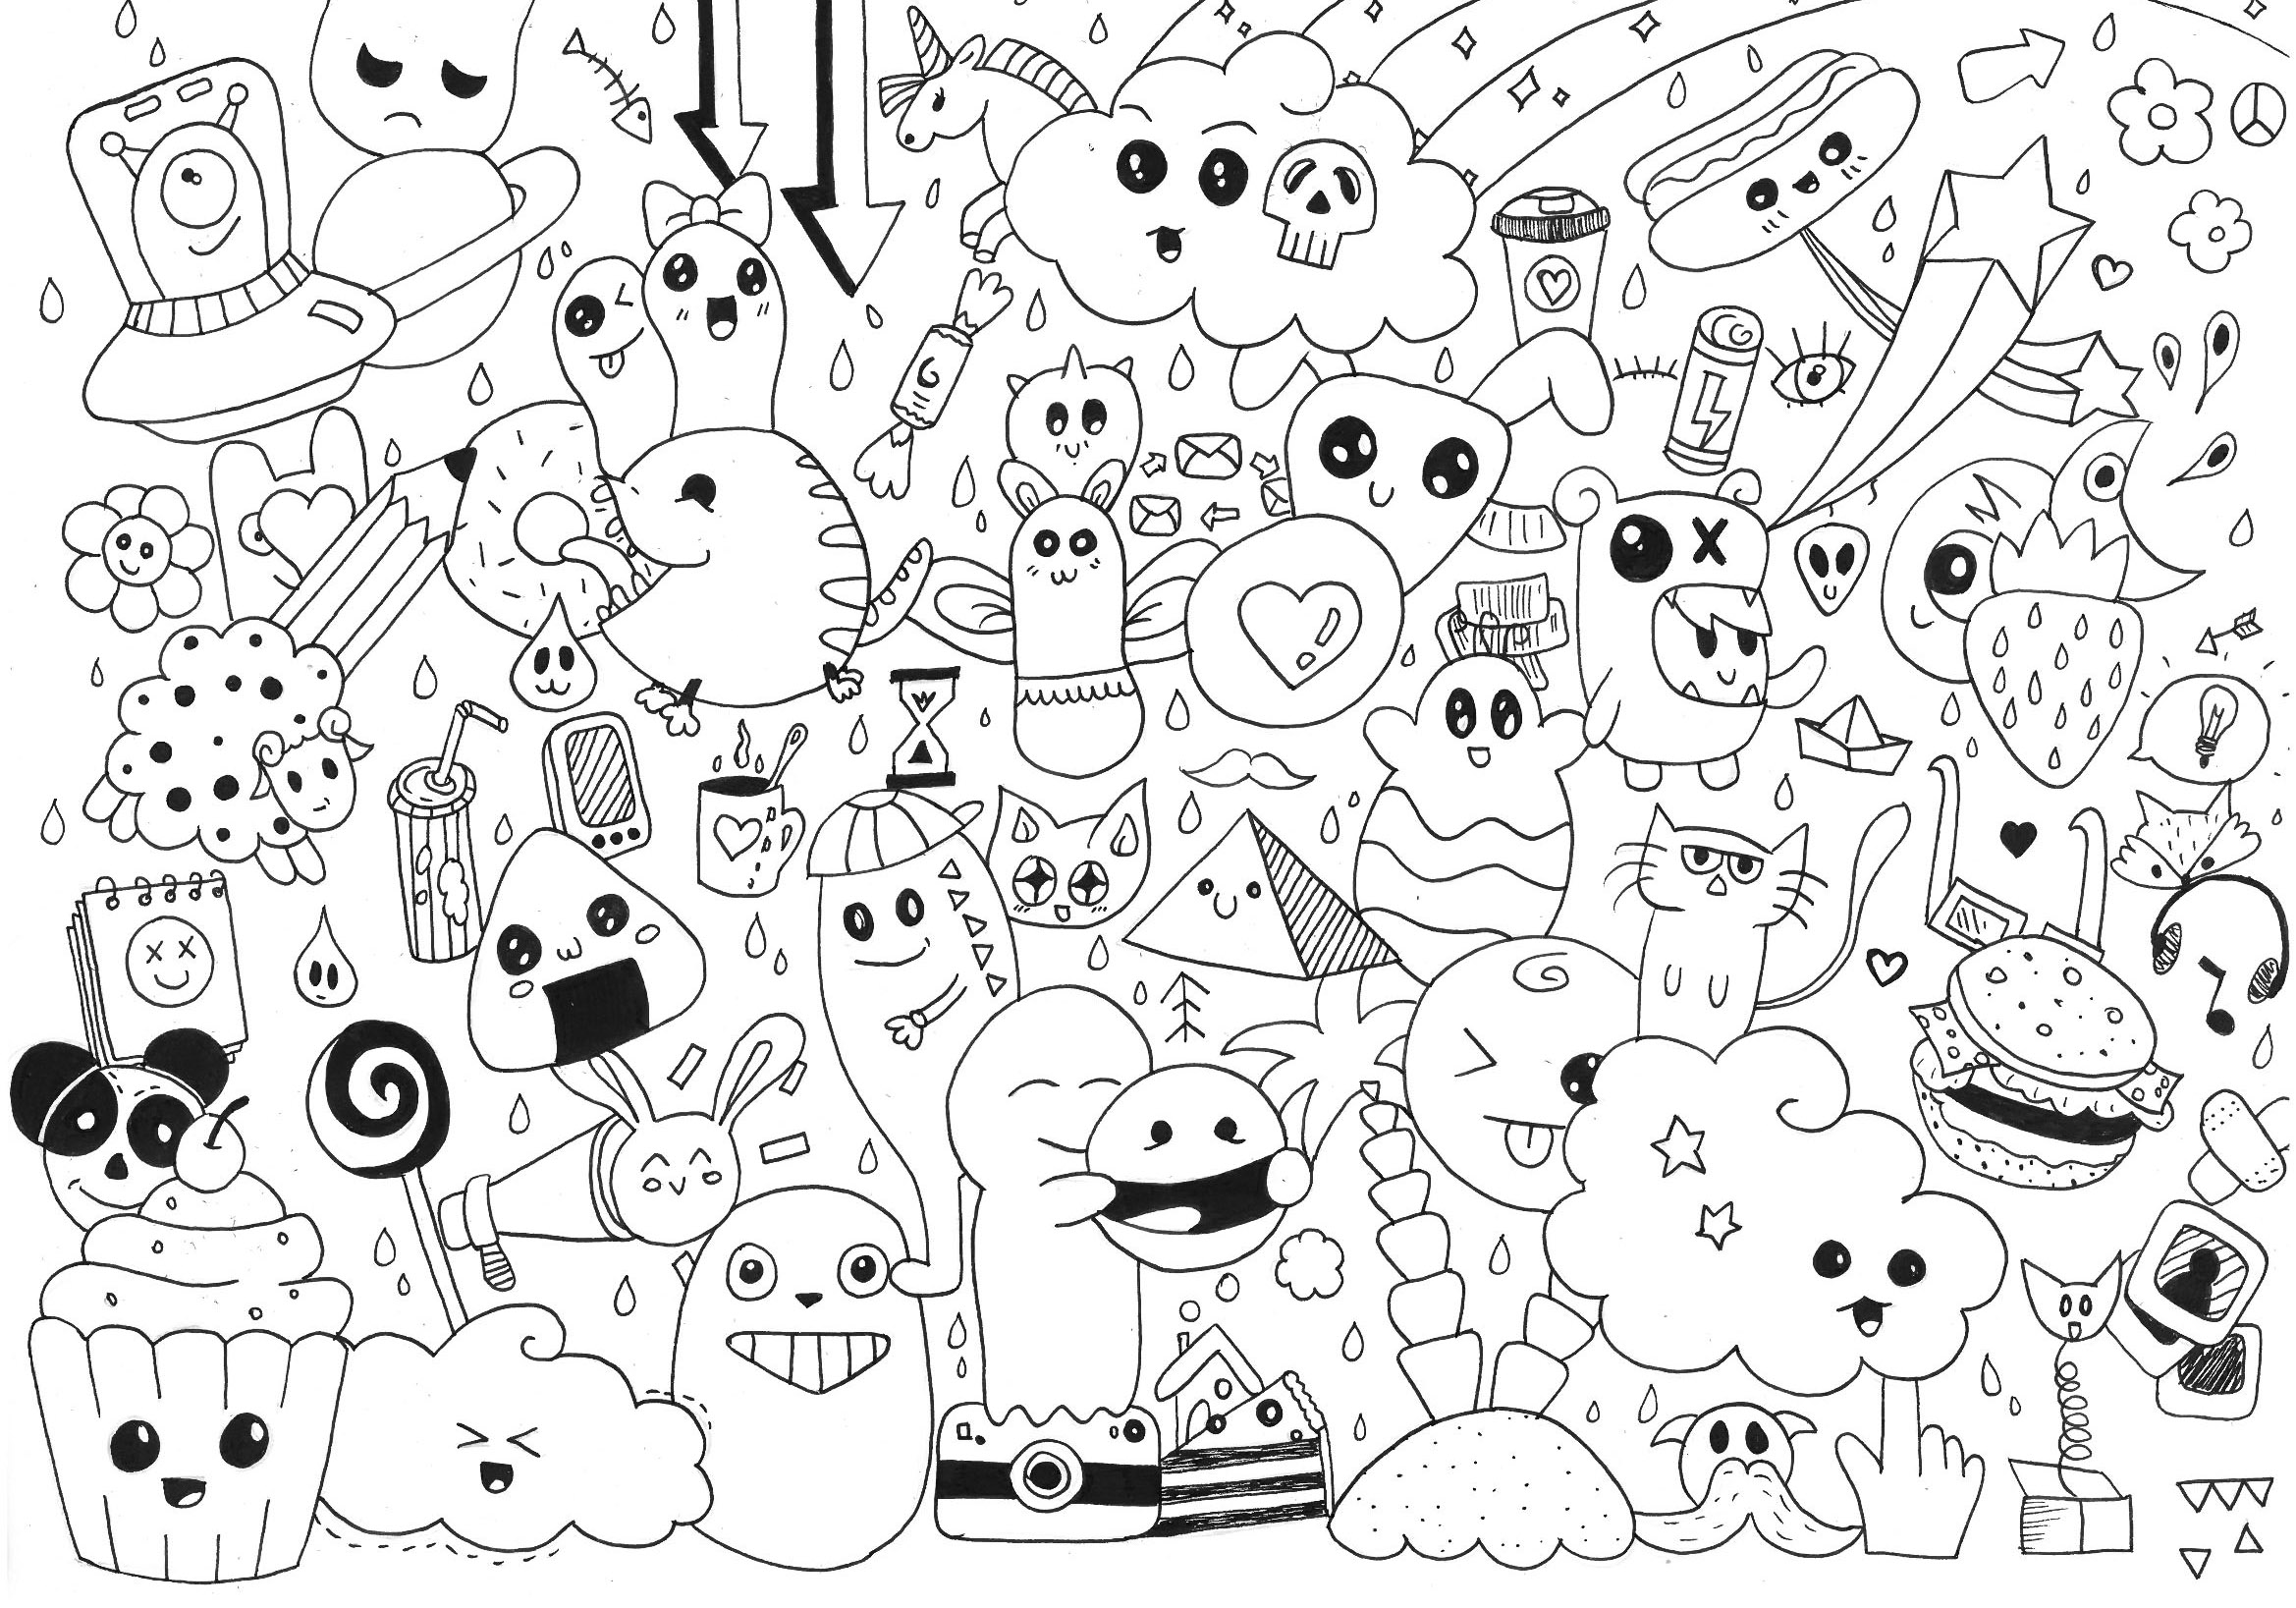 Free Doodle Art coloring page to print and color